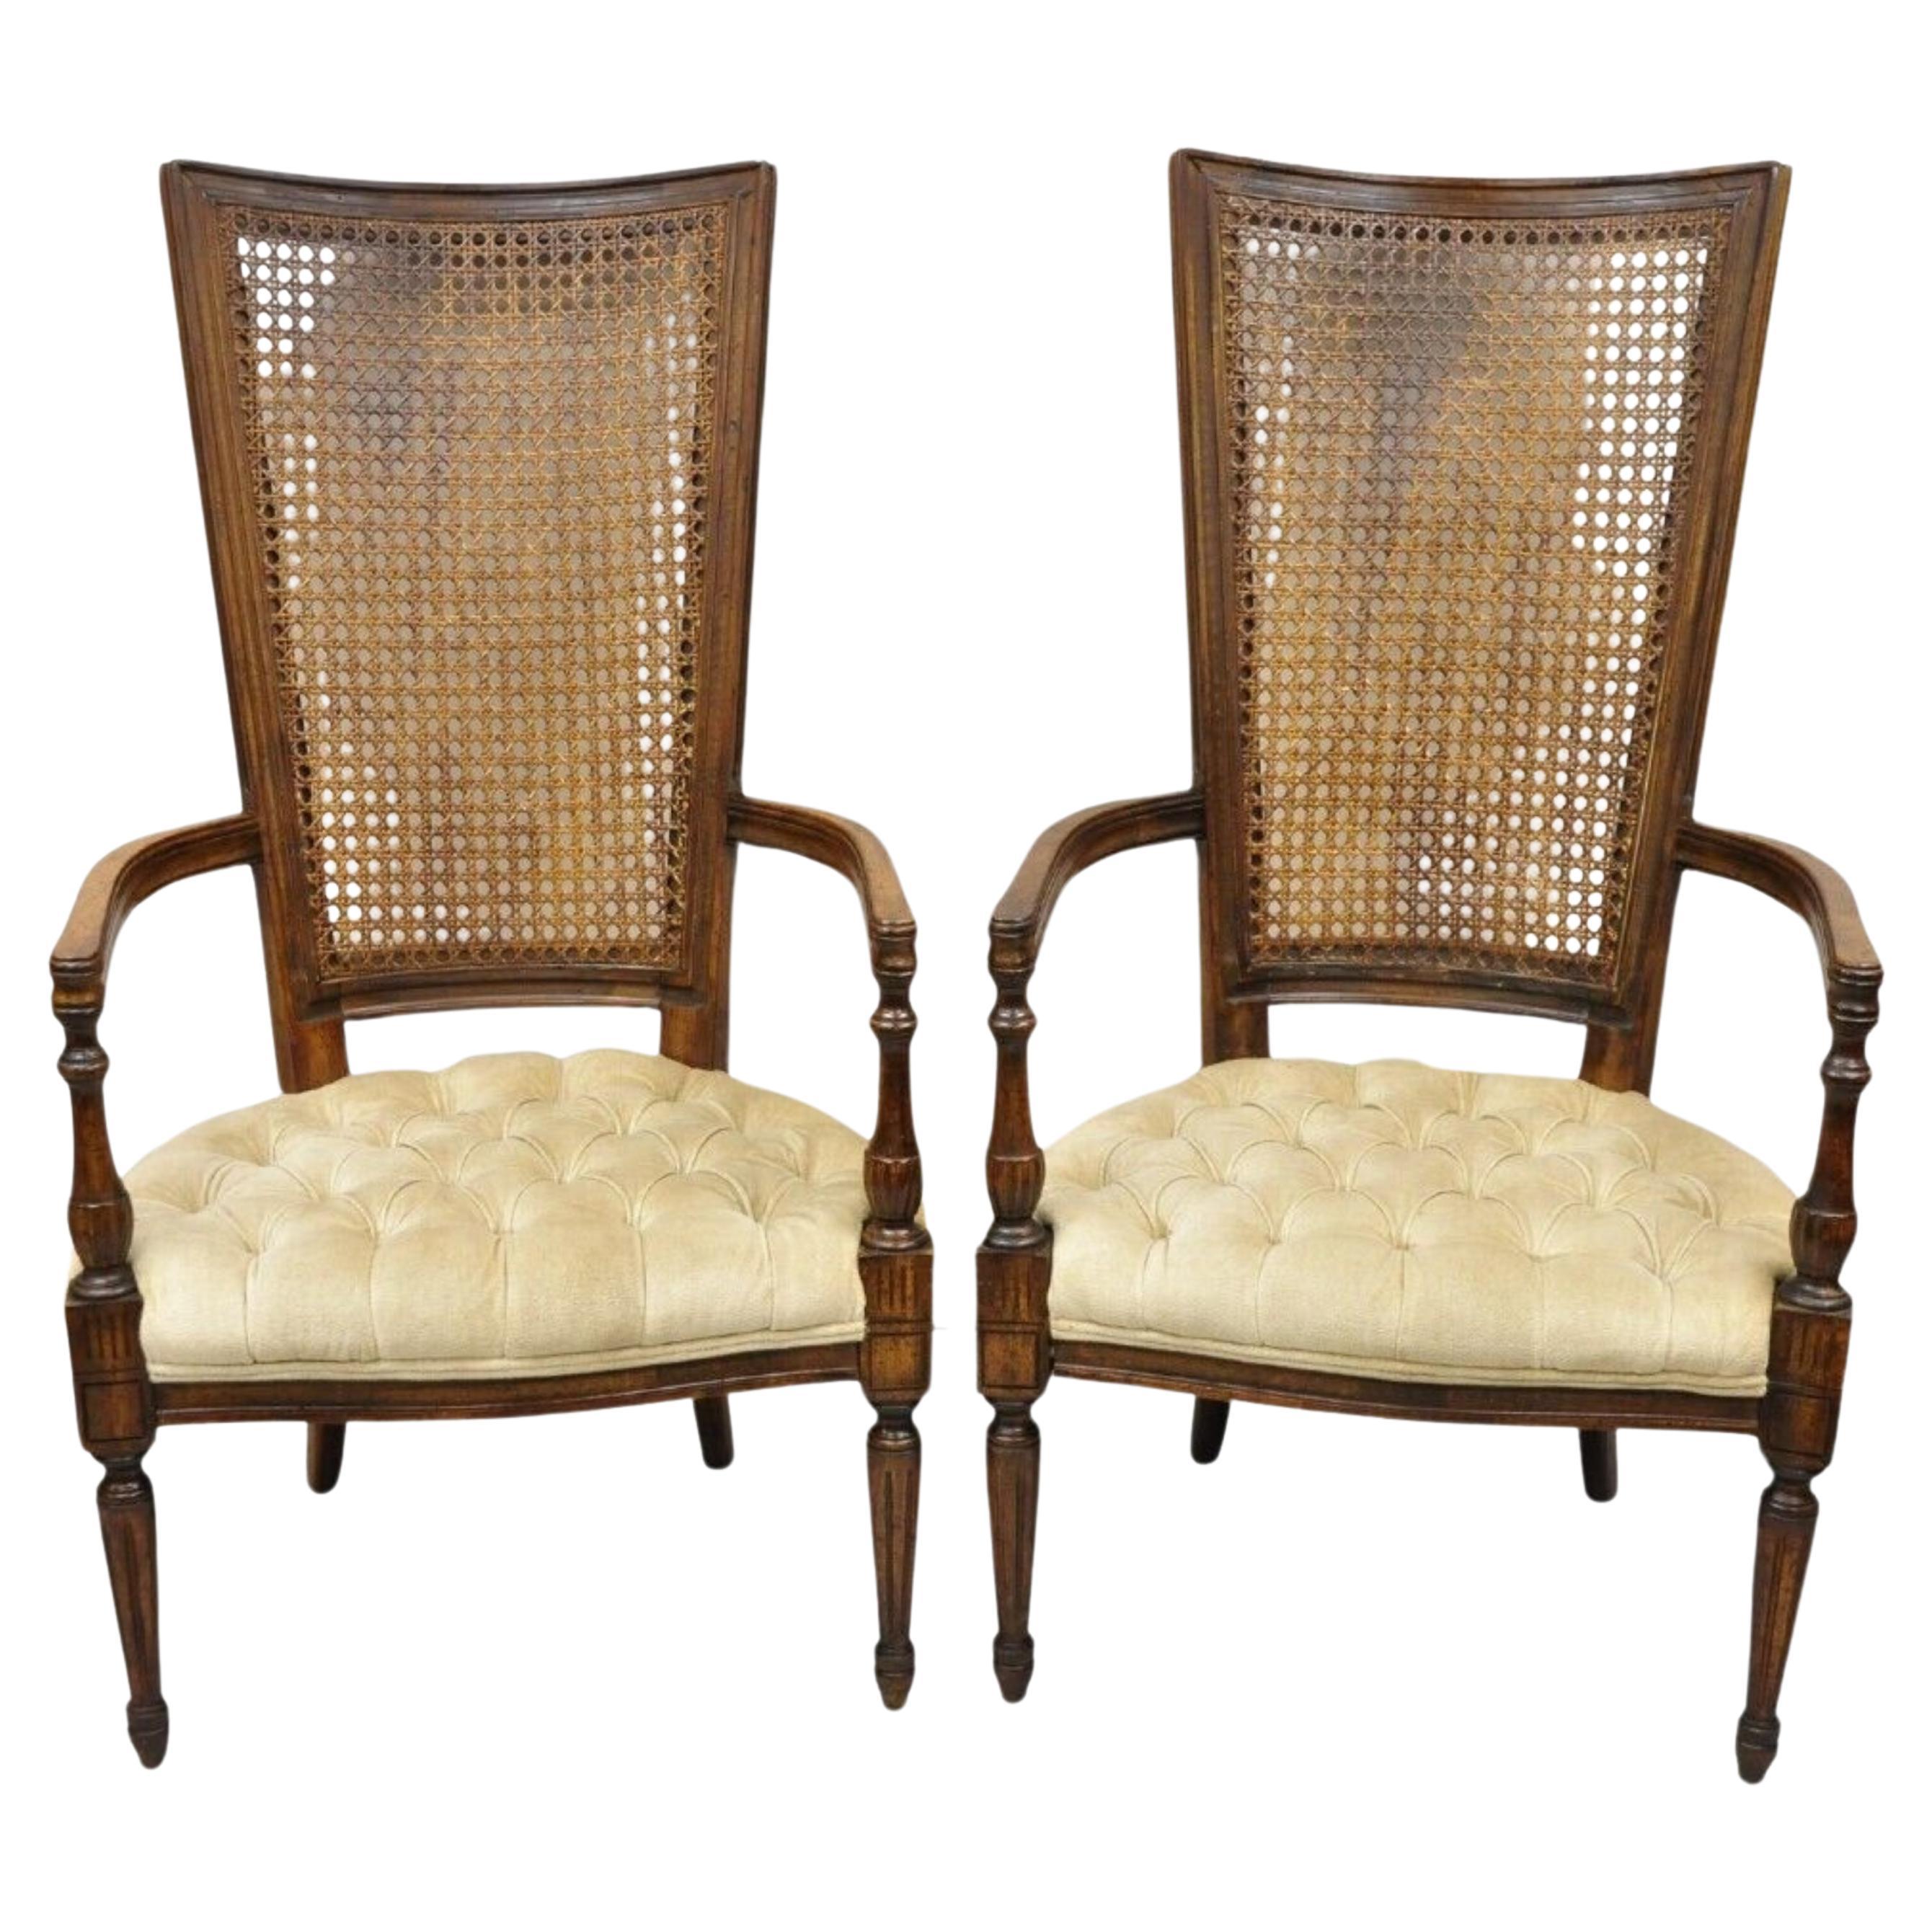 Vintage Hollywood Regency Tall Cane Back Fireside Lounge Armchairs - a Pair For Sale